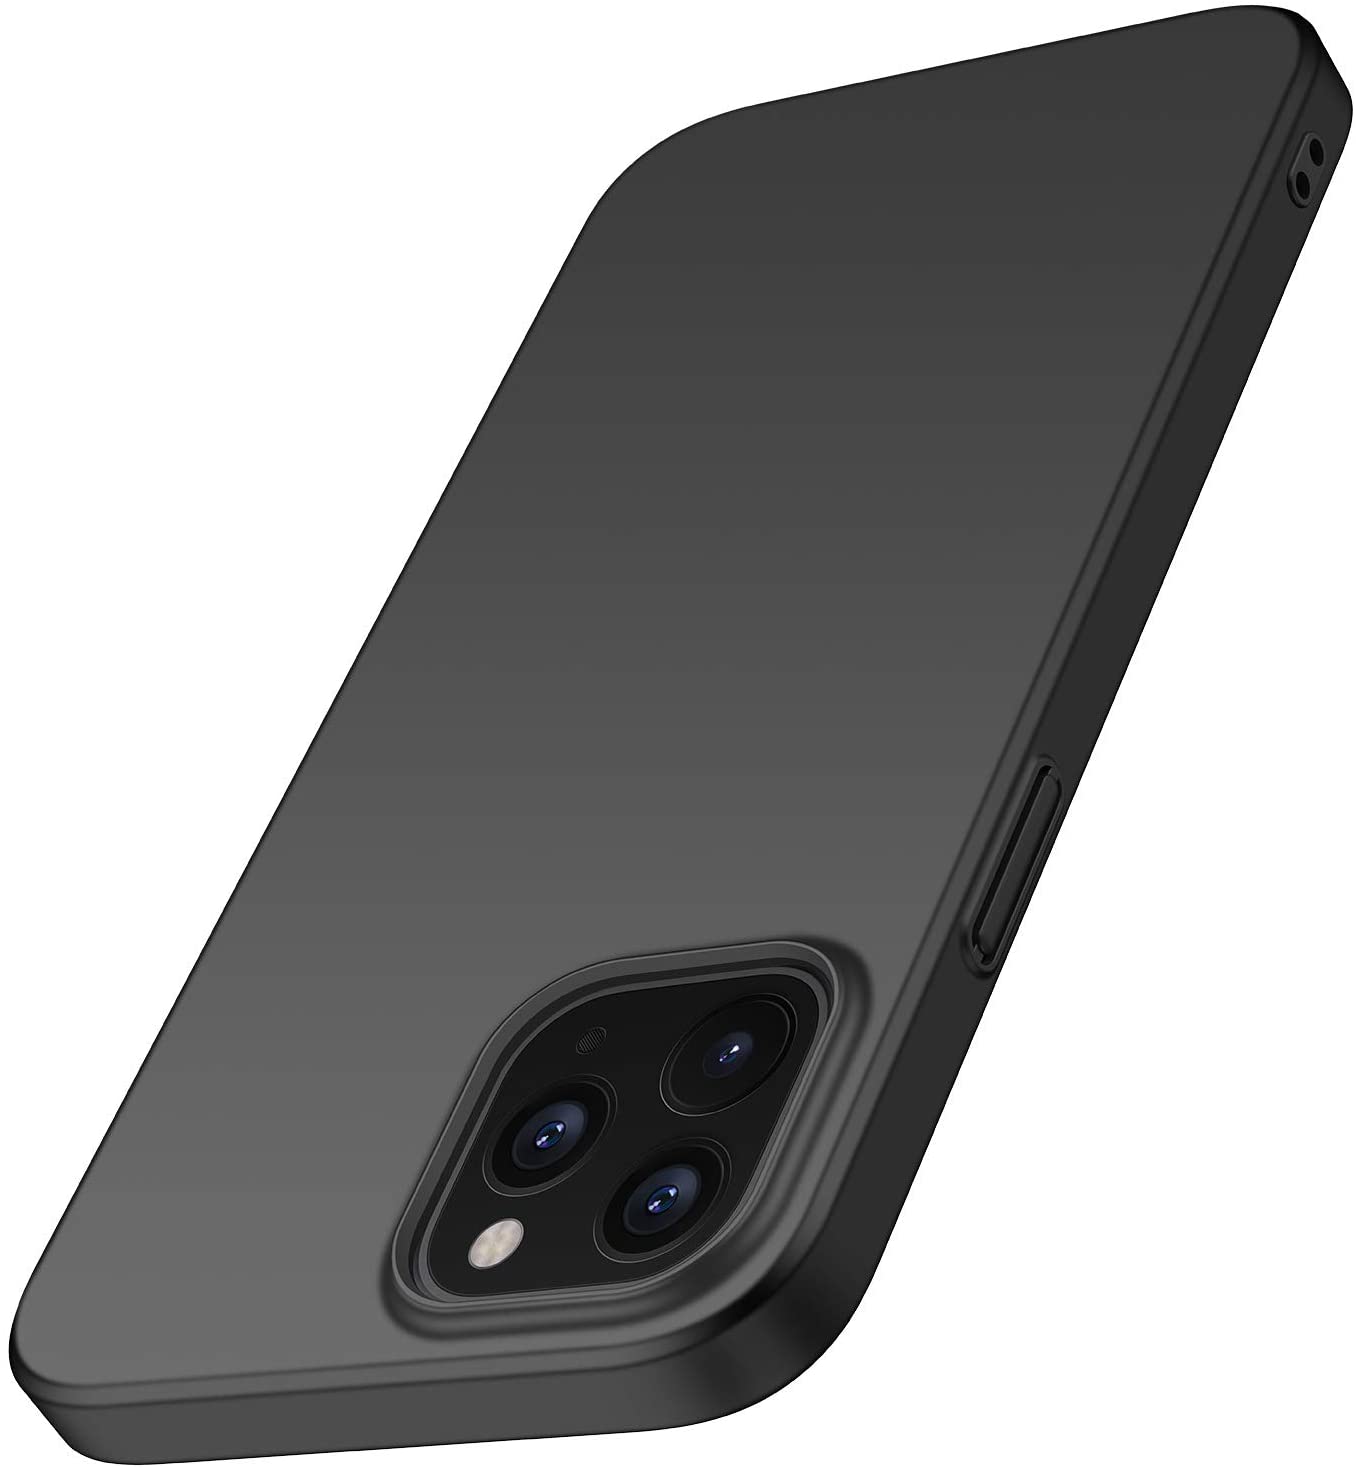 FREE - Anccer for iPhone 12 Case - Black.